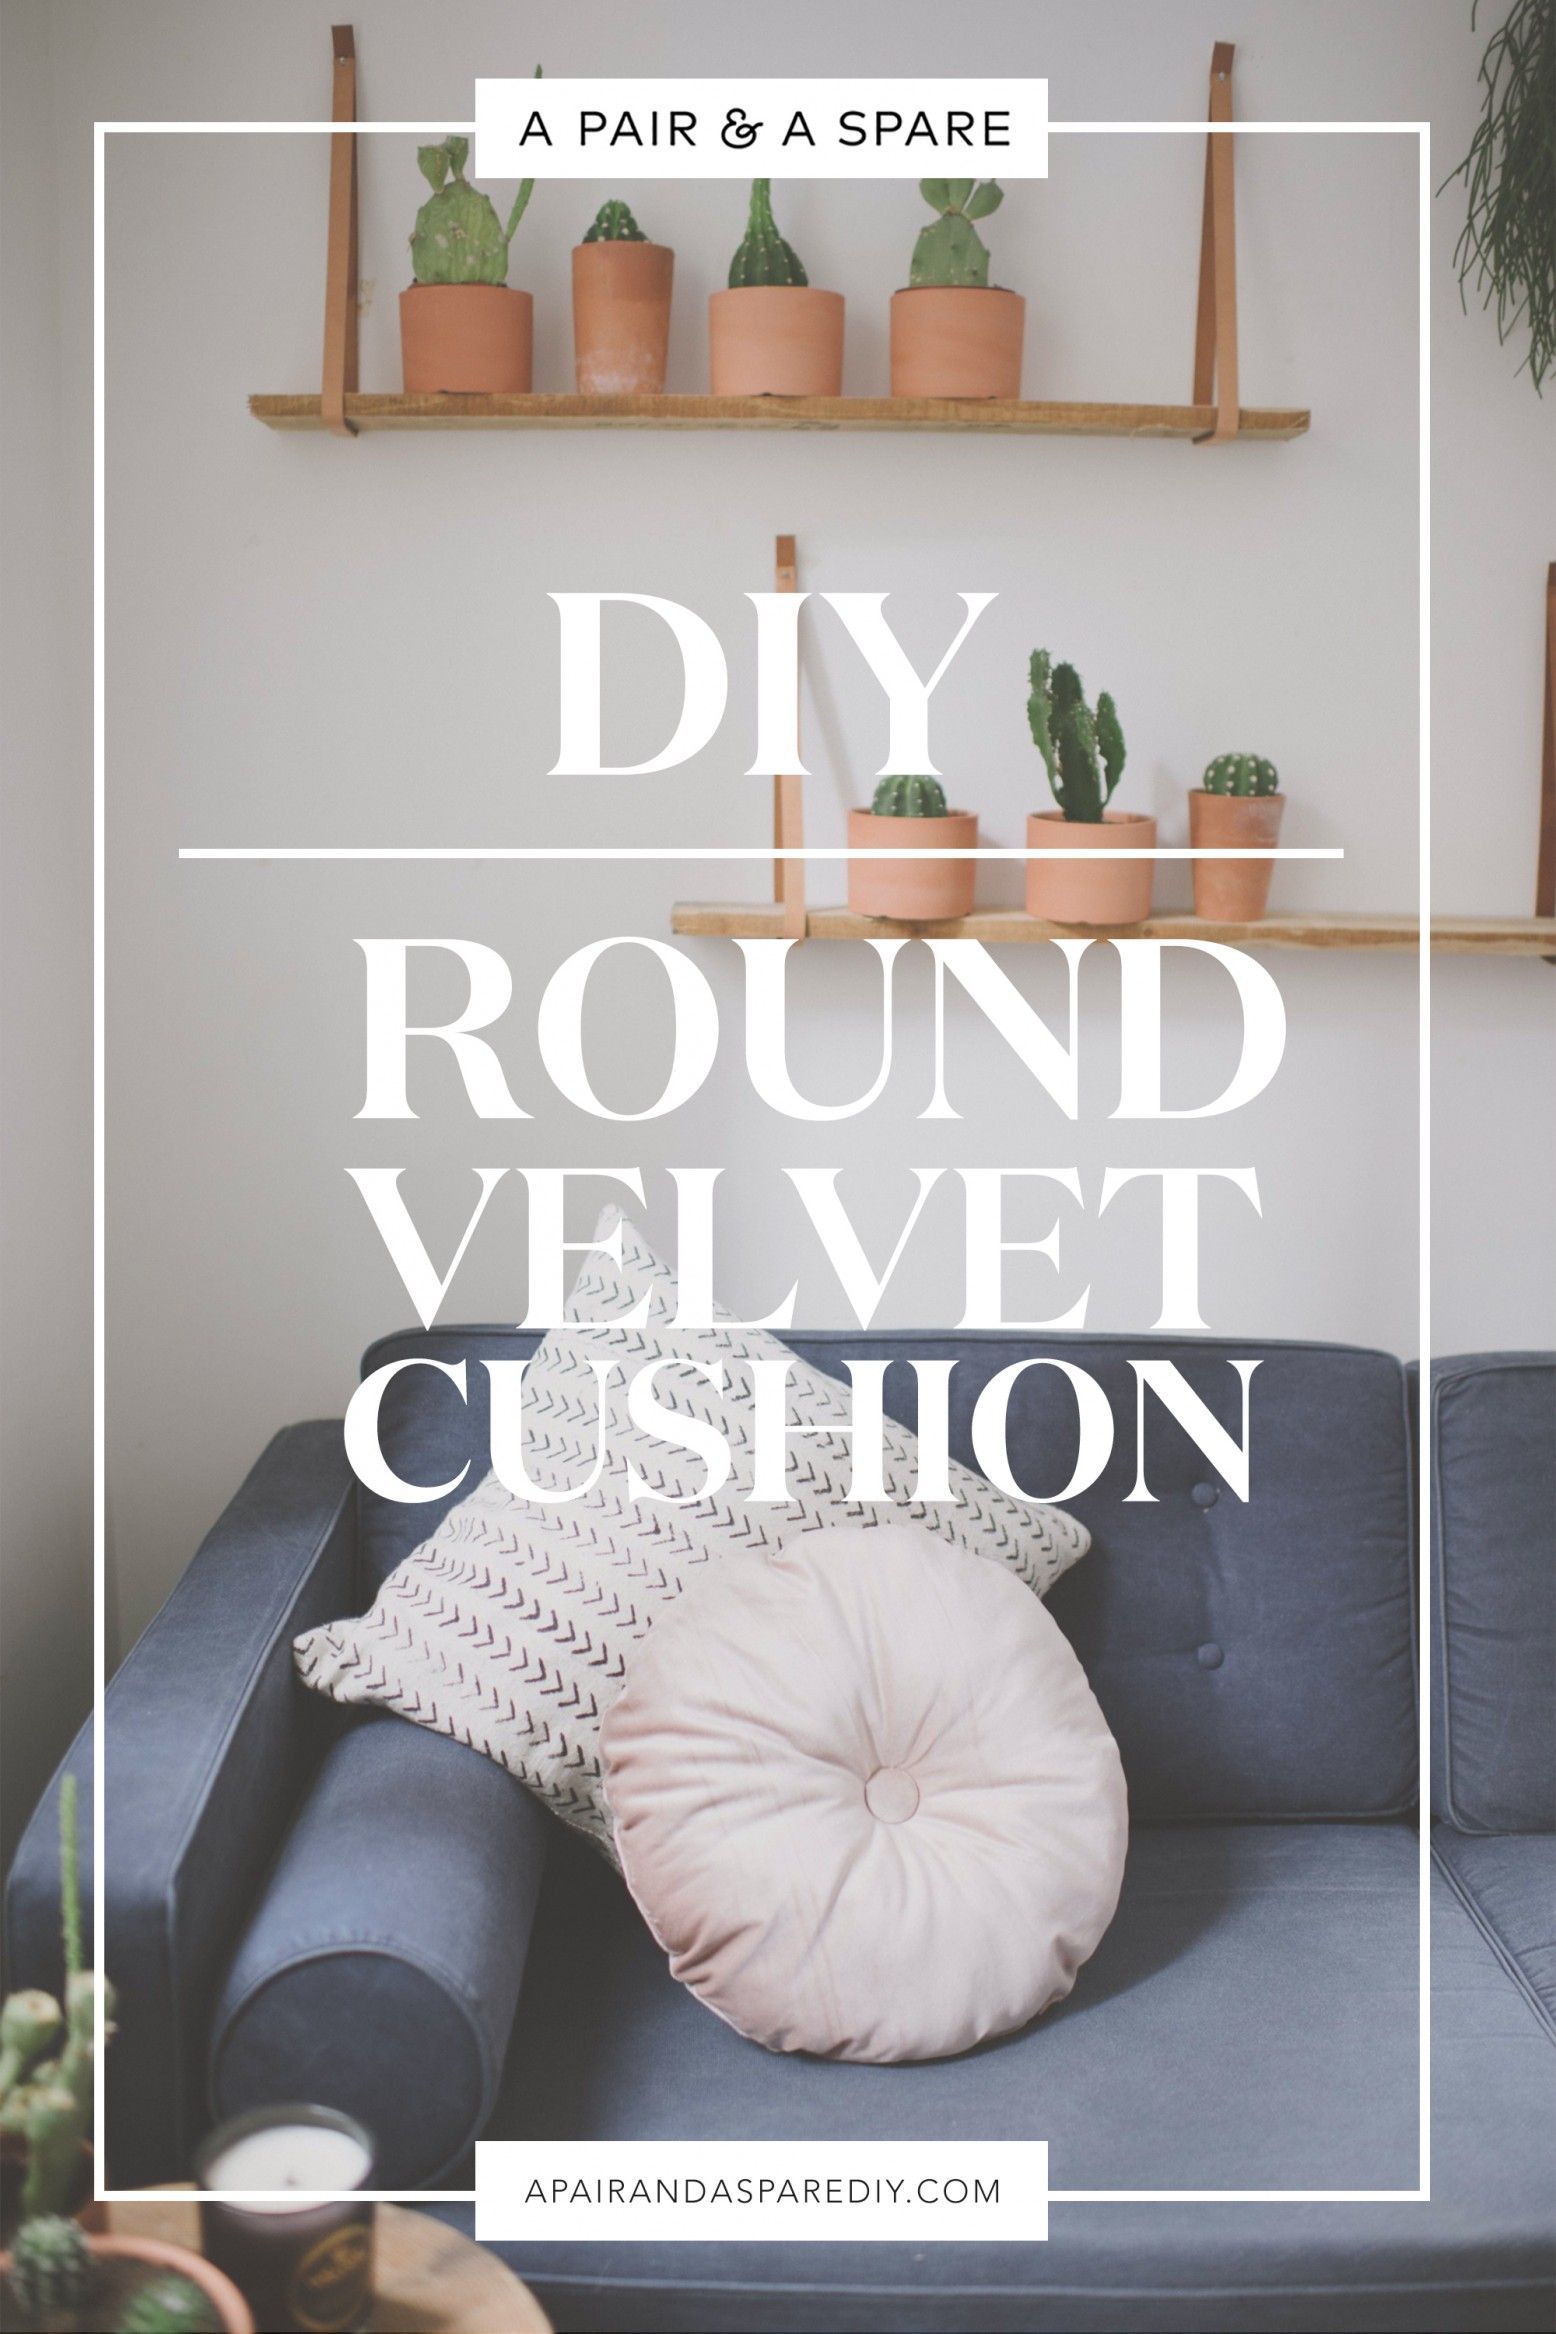 DIY Round Velvet Cushion with Covered Buttons | Collective Gen - DIY Round Velvet Cushion with Covered Buttons | Collective Gen -   19 diy Pillows chair ideas